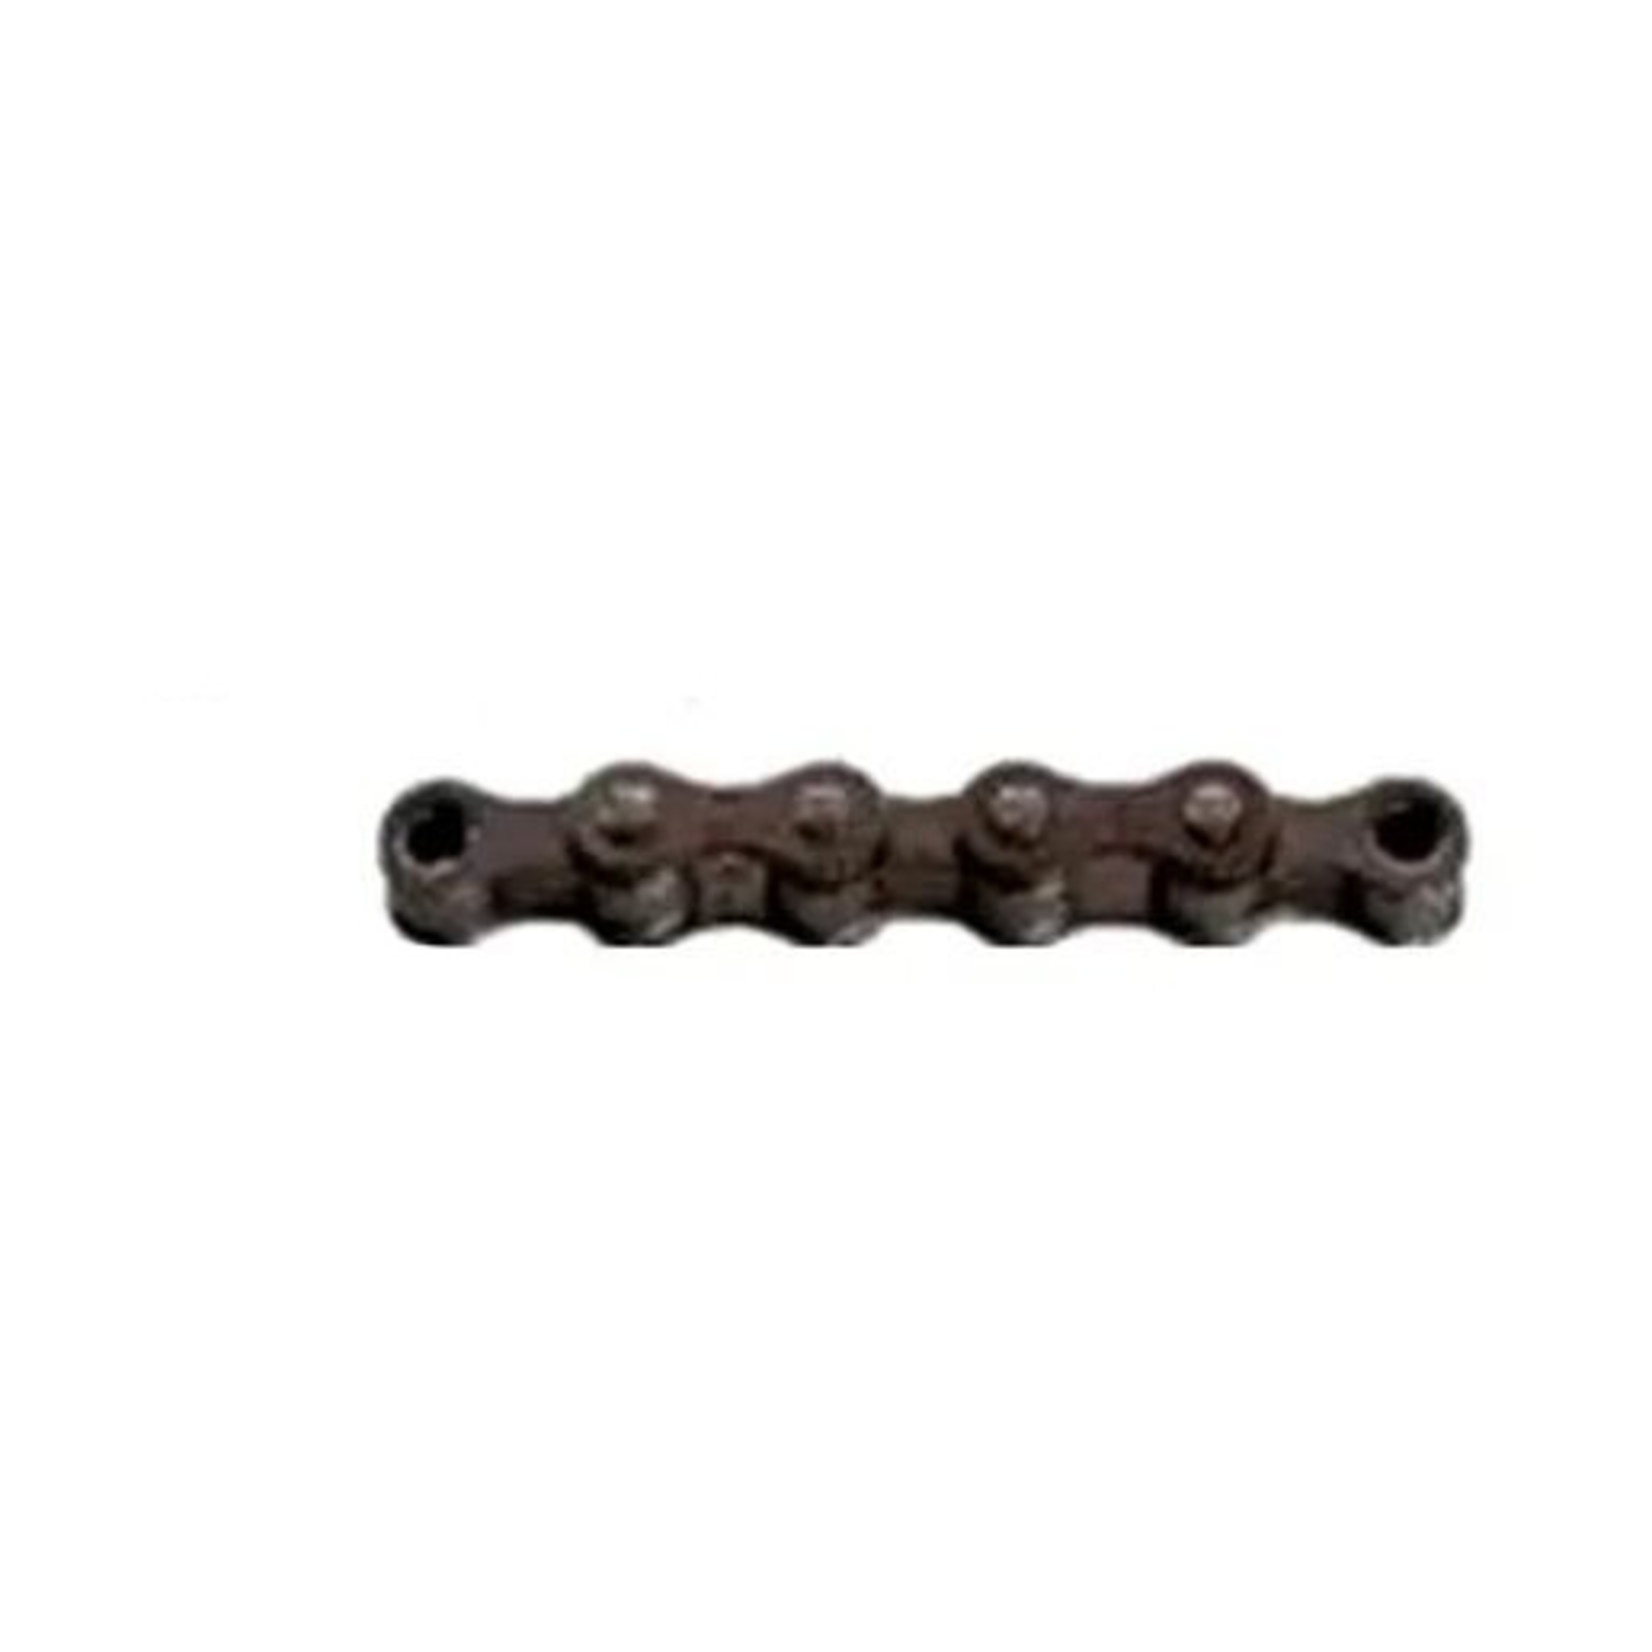 KMC KMC Bike Chain - S1 - Single Speed - 1/2" X 1/8" X 112L - Connect Link - Brown